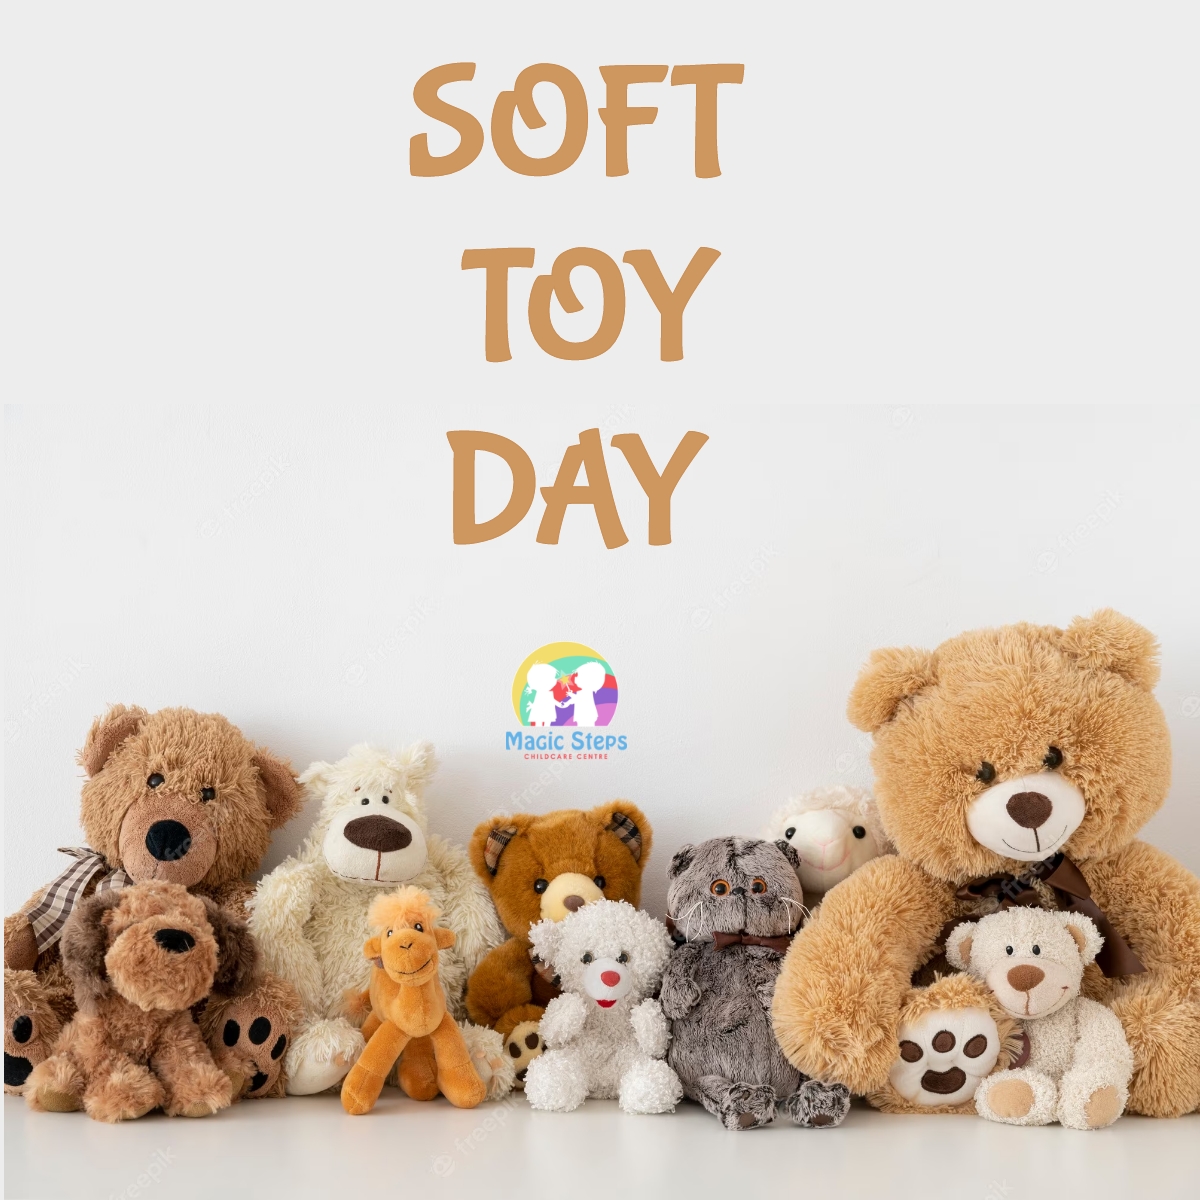 Soft Toy Day- Tuesday 25th April